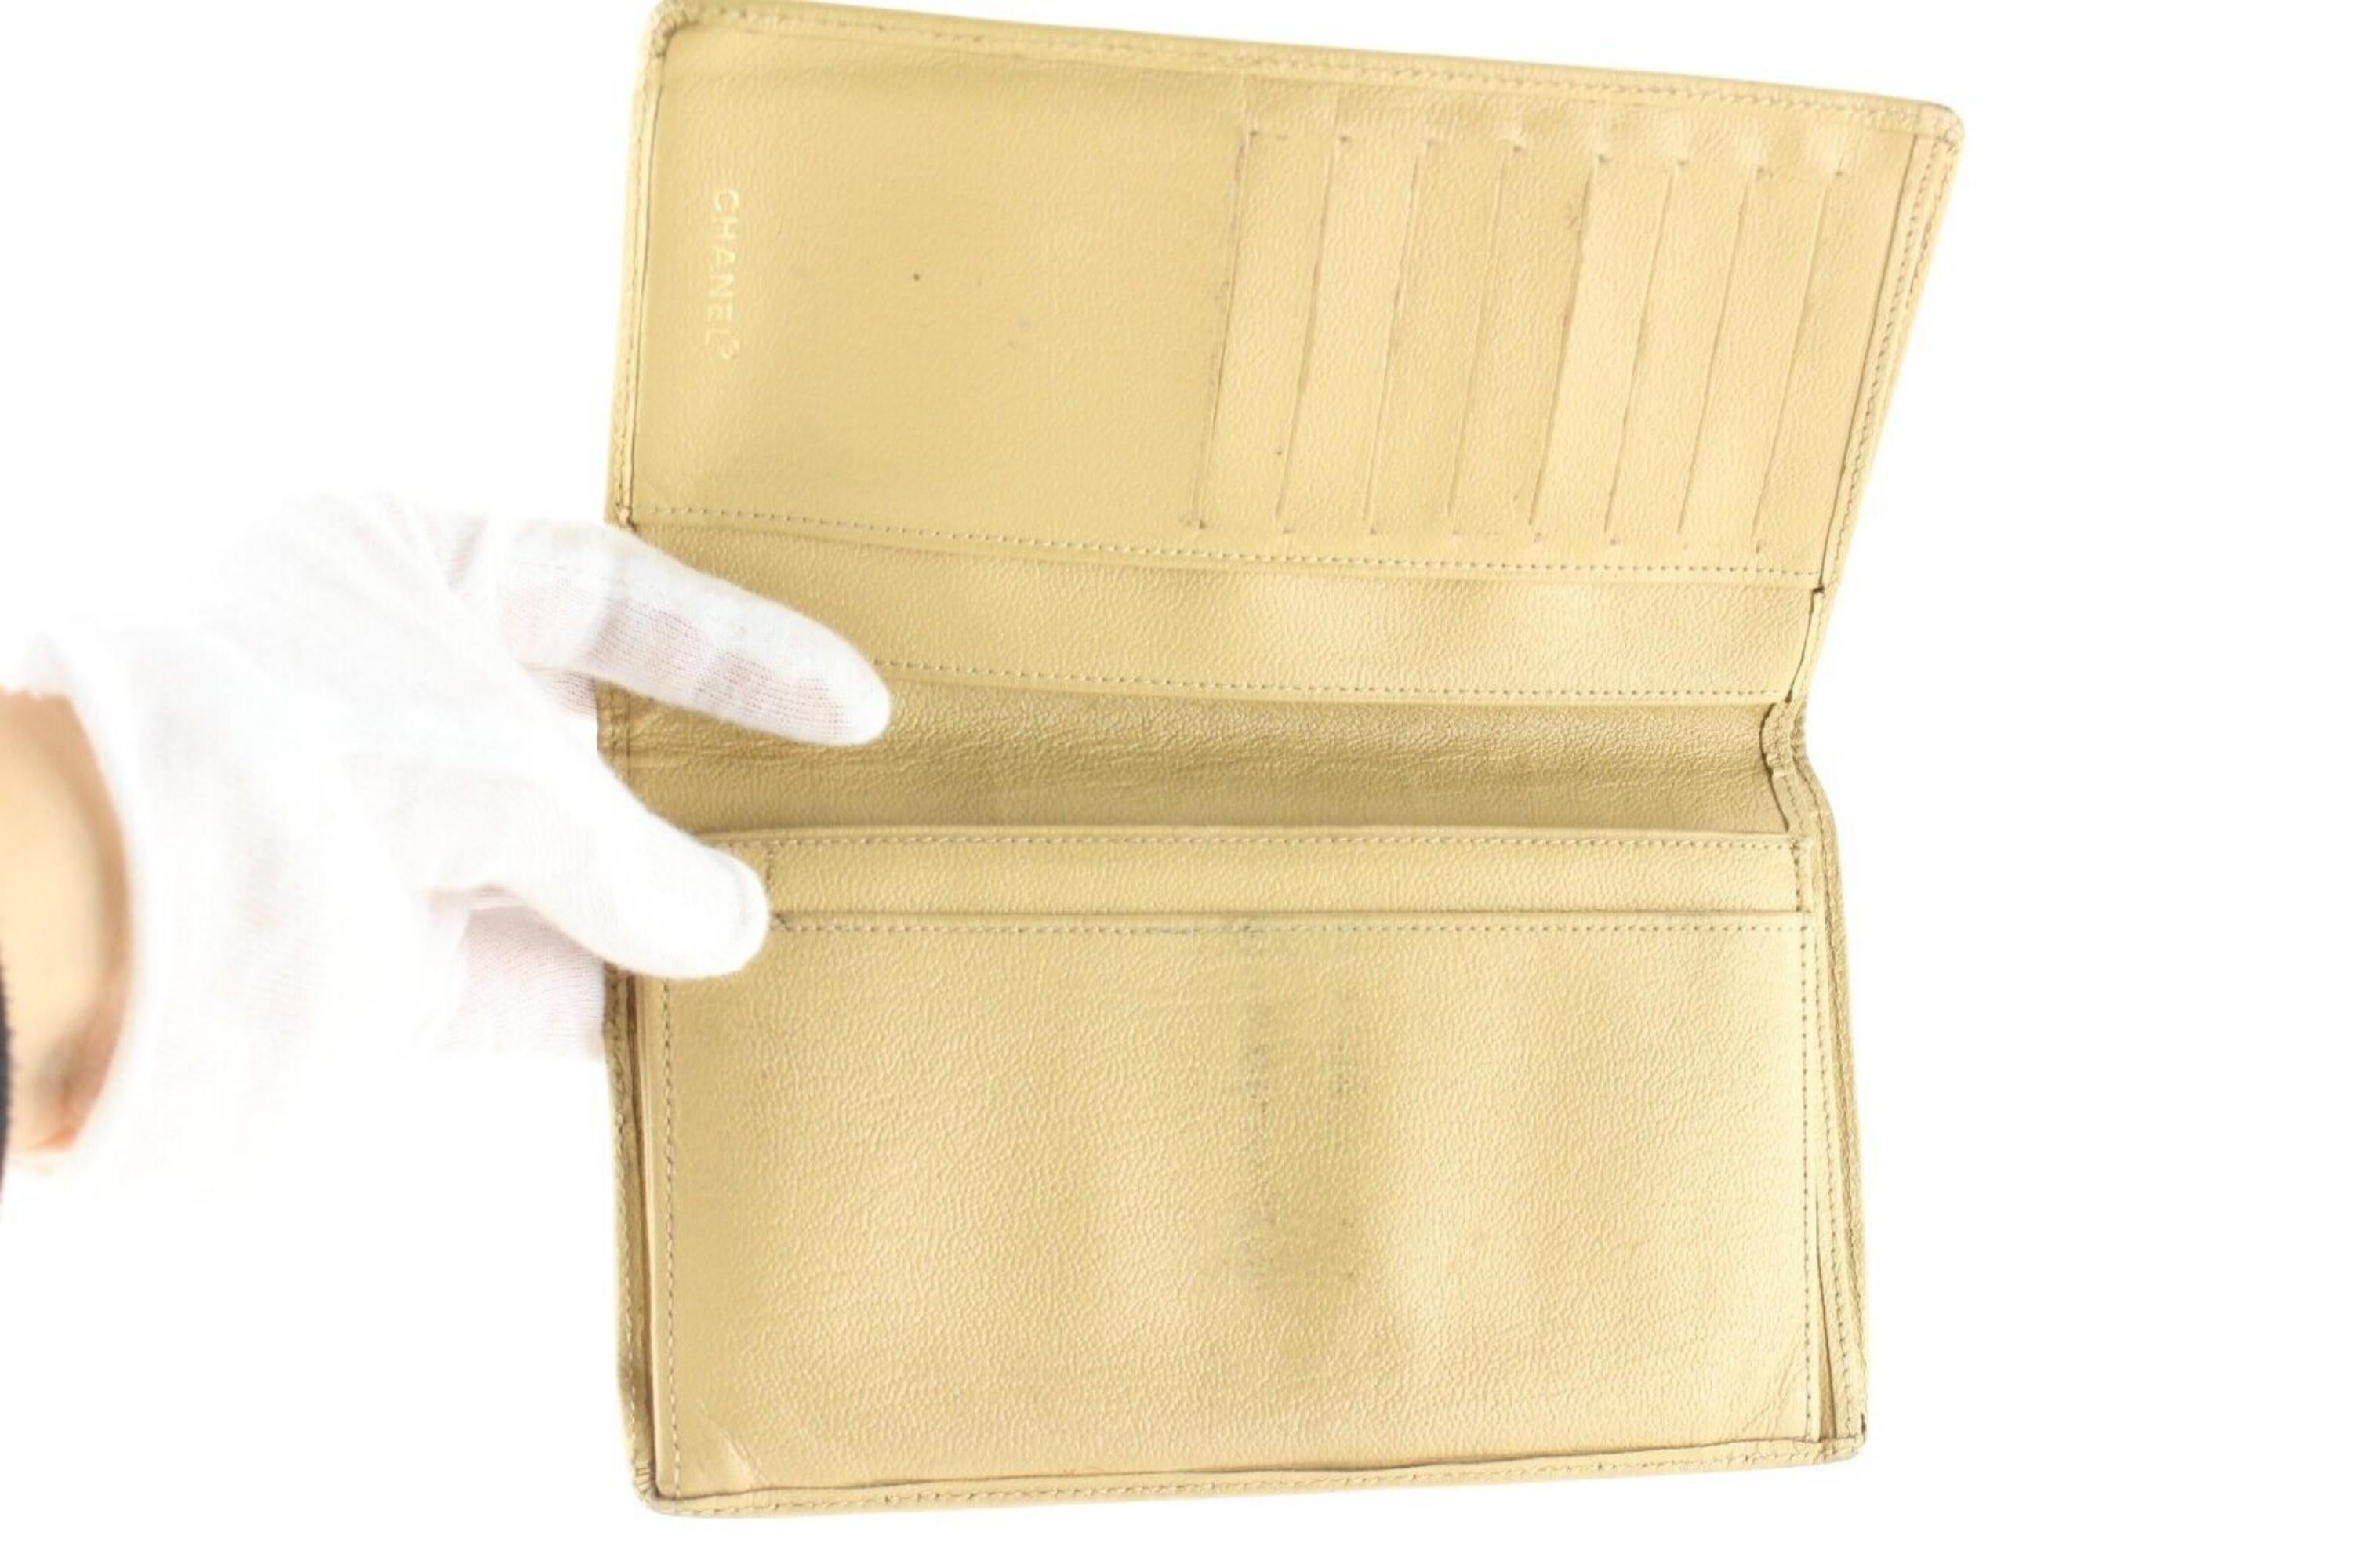 Chanel Beige CC Long Bifold Flap Wallet 2C512S In Fair Condition For Sale In Dix hills, NY